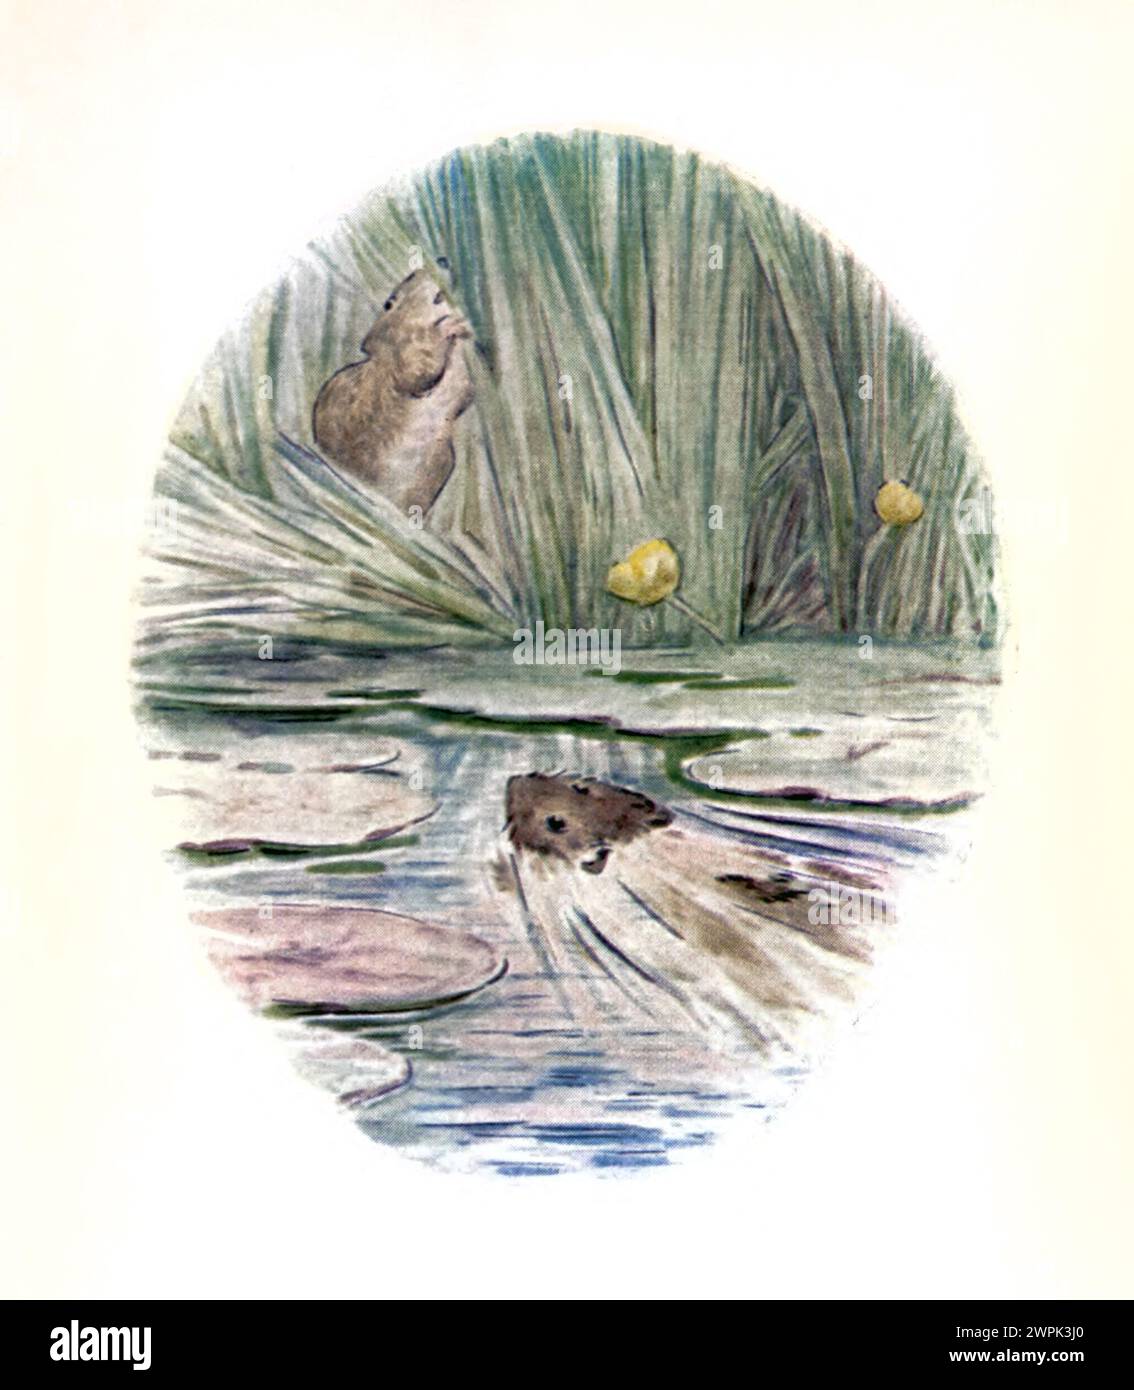 The tale of Mr. Jeremy Fisher by Beatrix Potter, The Tale of Mr. Jeremy Fisher is a children's book, written and illustrated by Beatrix Potter. It was published by Frederick Warne & Co. in July 1906. Jeremy Fisher is a frog that lives in a 'slippy-sloppy' house at the edge of a pond. During one rainy day, he collects worms for fishing and sets off across the pond on his lily-pad boat. He plans to invite his friends for dinner if he catches more than five minnows. He encounters all sorts of setbacks to his goal, and escapes a large trout who tries to swallow him. He swims for shore, decides he Stock Photo